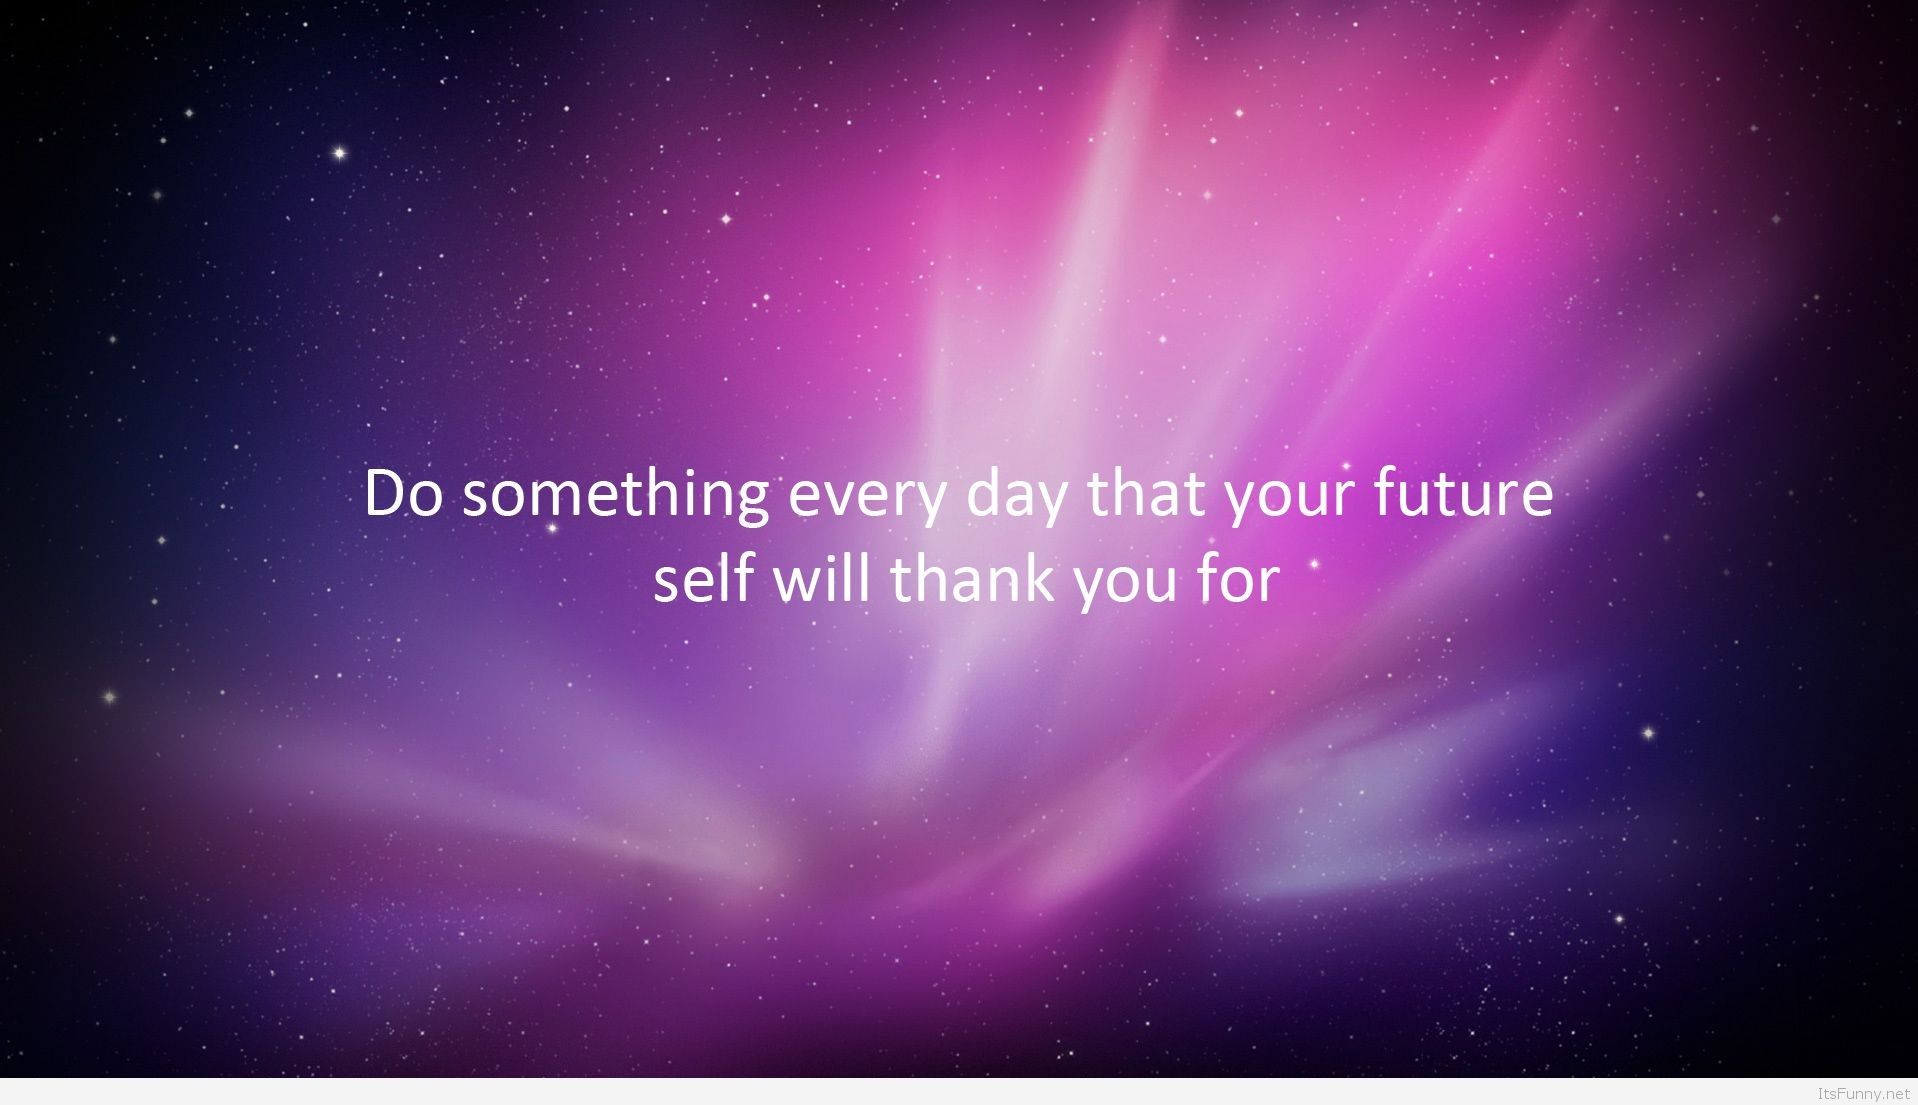 Inspirational Quote For Today Wallpaper - Mac Os X Snow Leopard - HD Wallpaper 